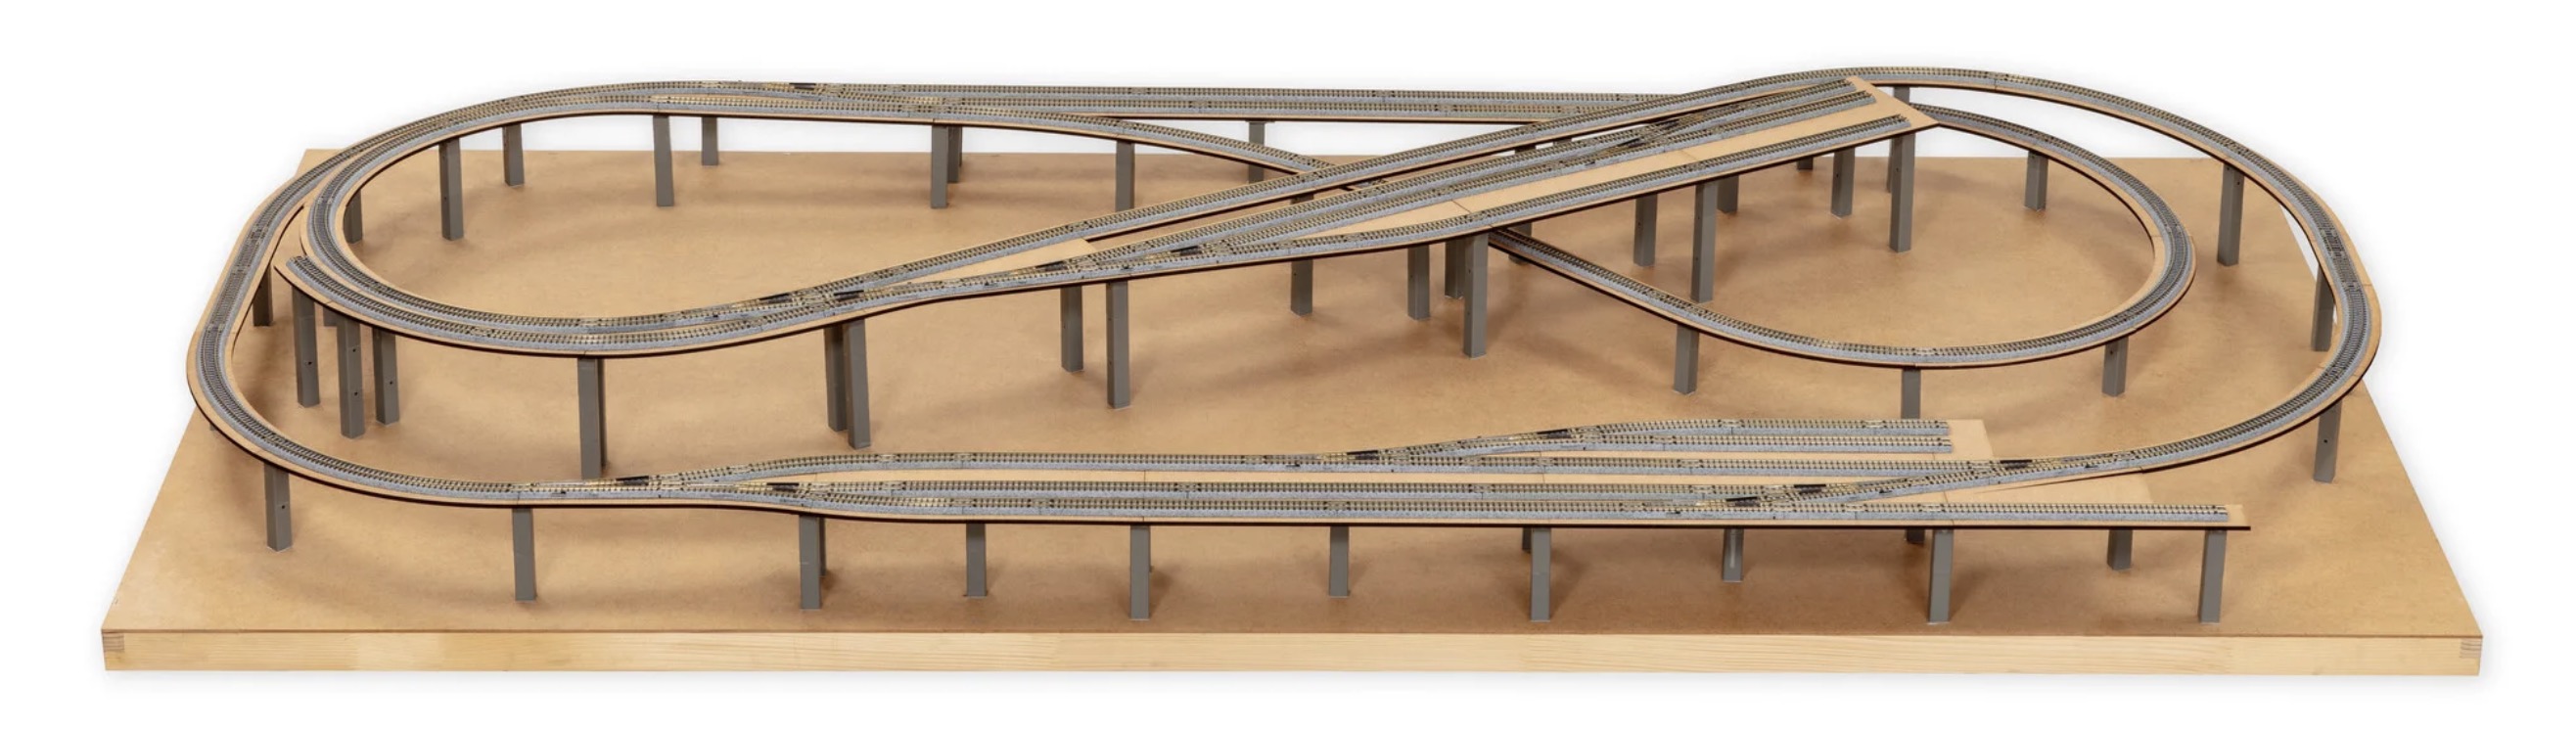 N Scale - Noch - 53705 - Structure, Layout Kit - Railroad Structures